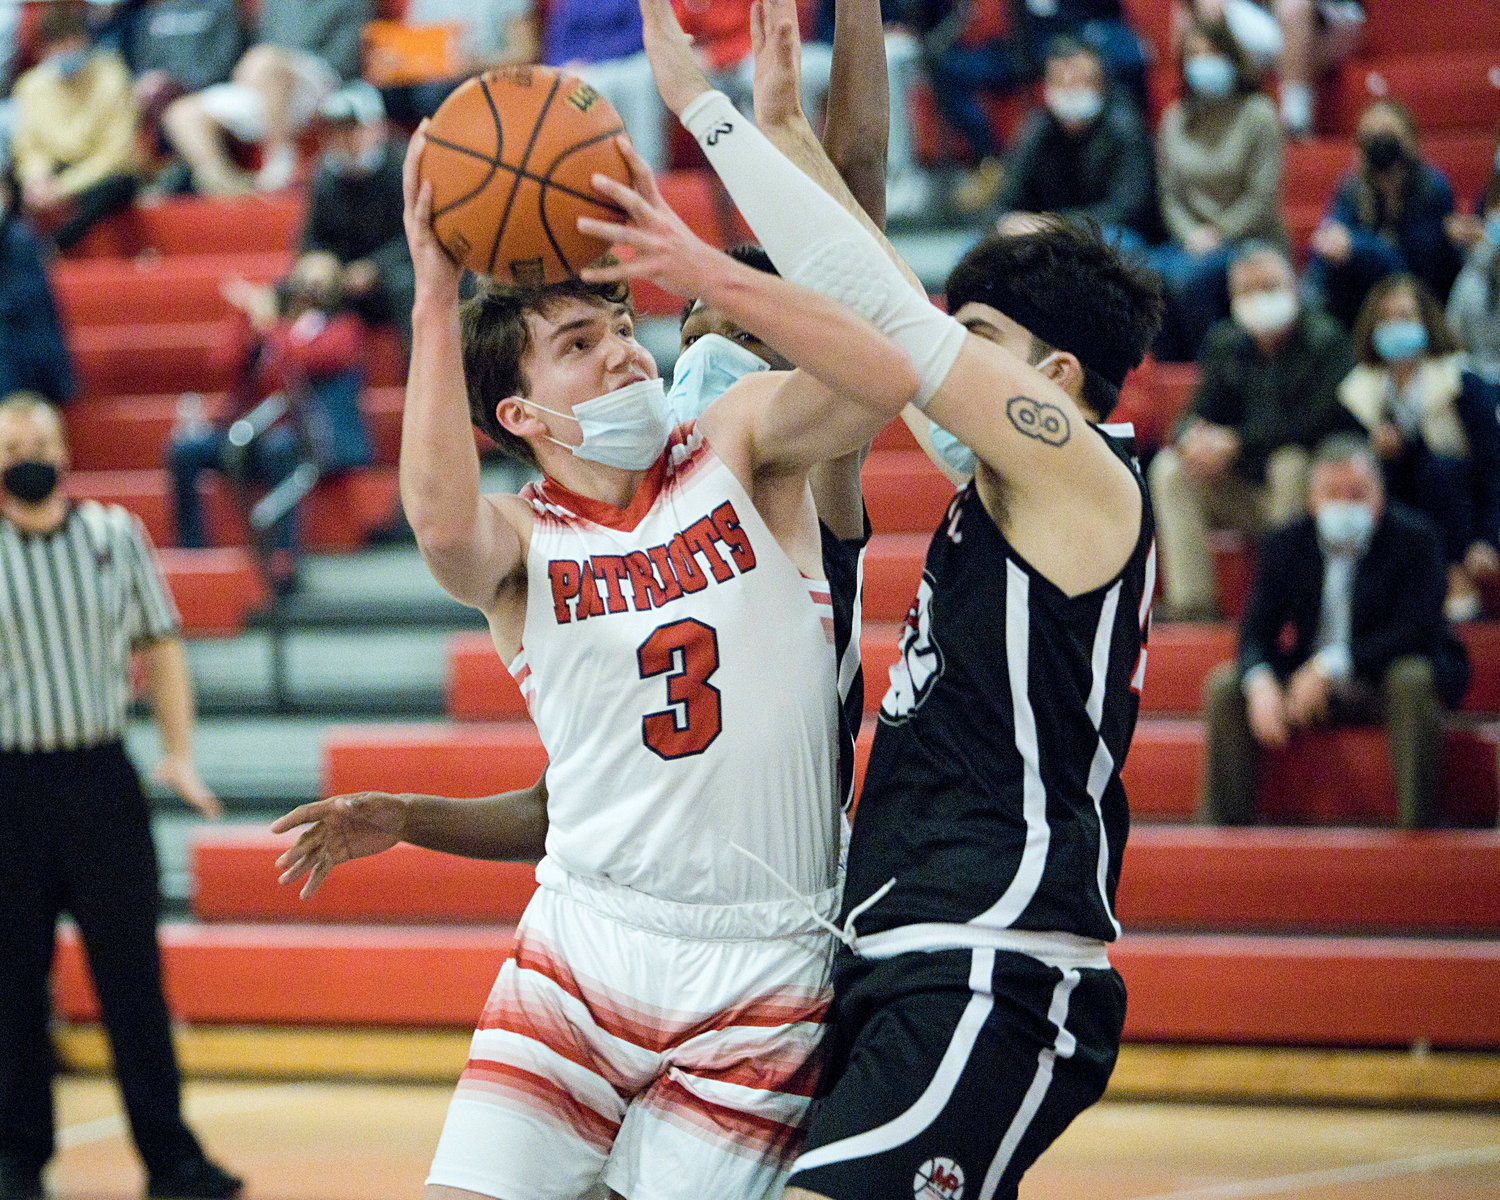 Jack Downing is pressured by a Mt. Pleasant opponent while trying to make a shot.